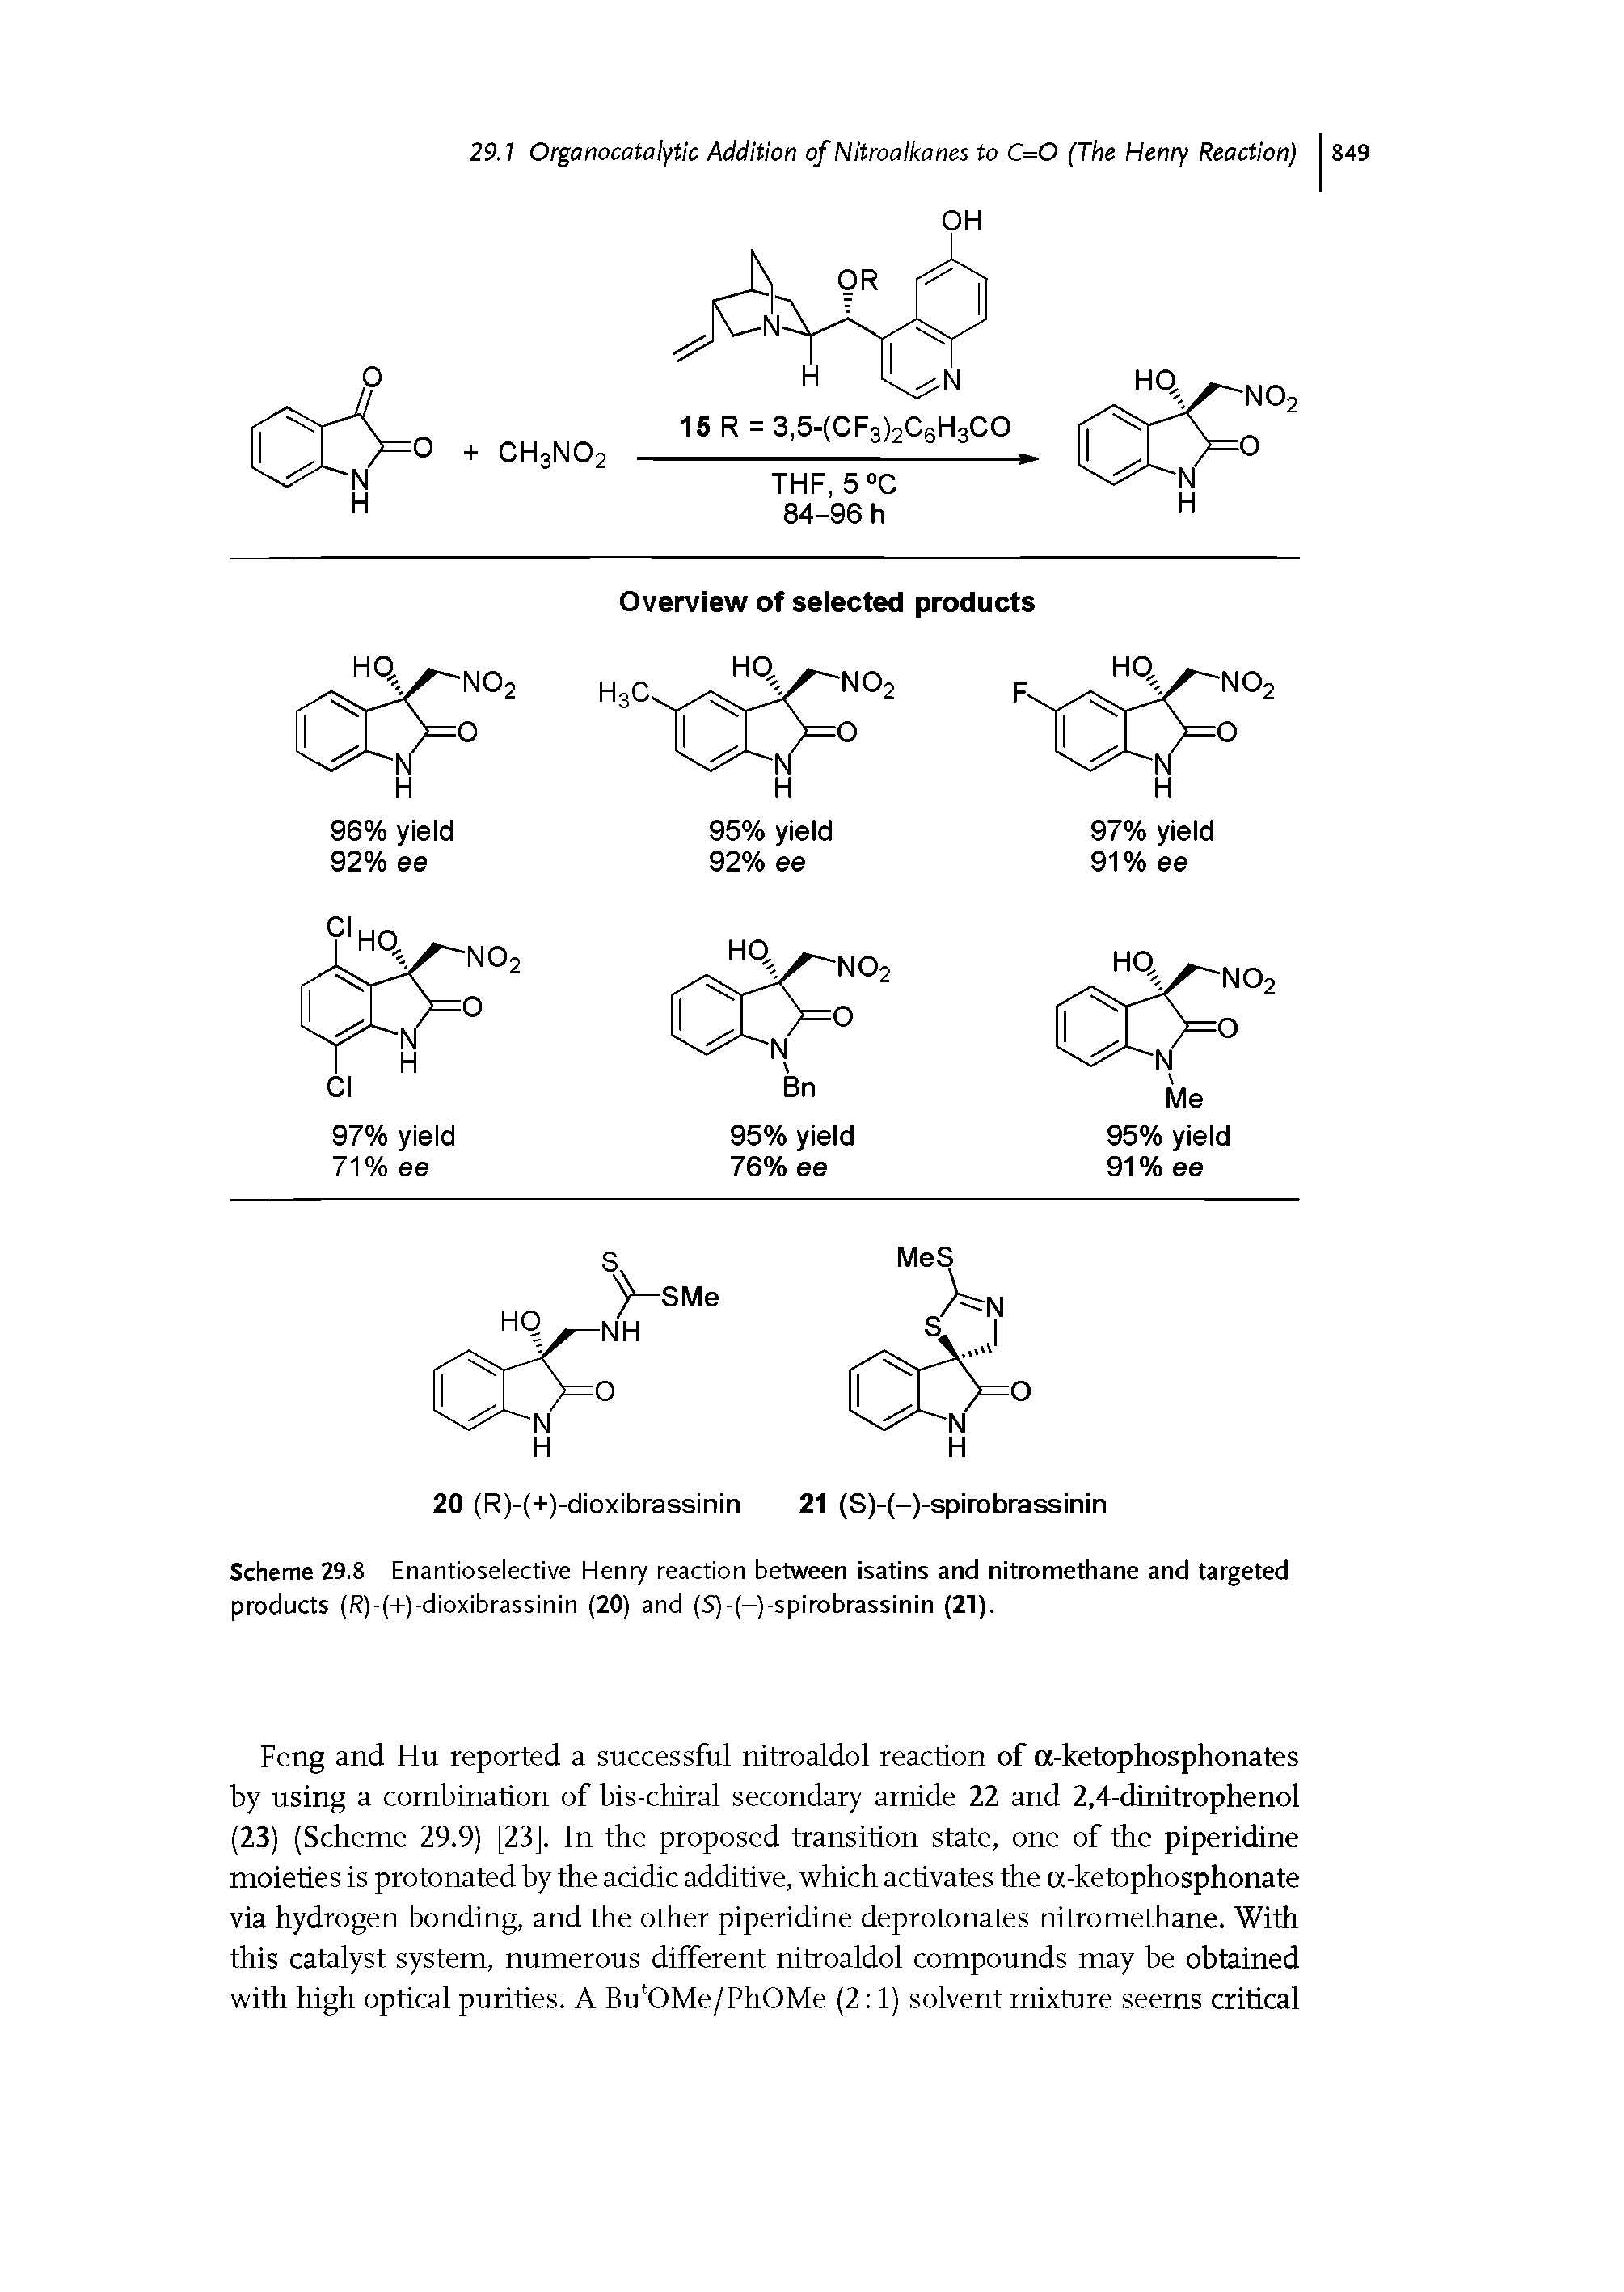 Scheme 29.8 Enantioselective Henry reaction between isatins and nitromethane and targeted products (R)-(+)-dioxibrassinin (20) and (S)-(-)-spirobrassinin (21).